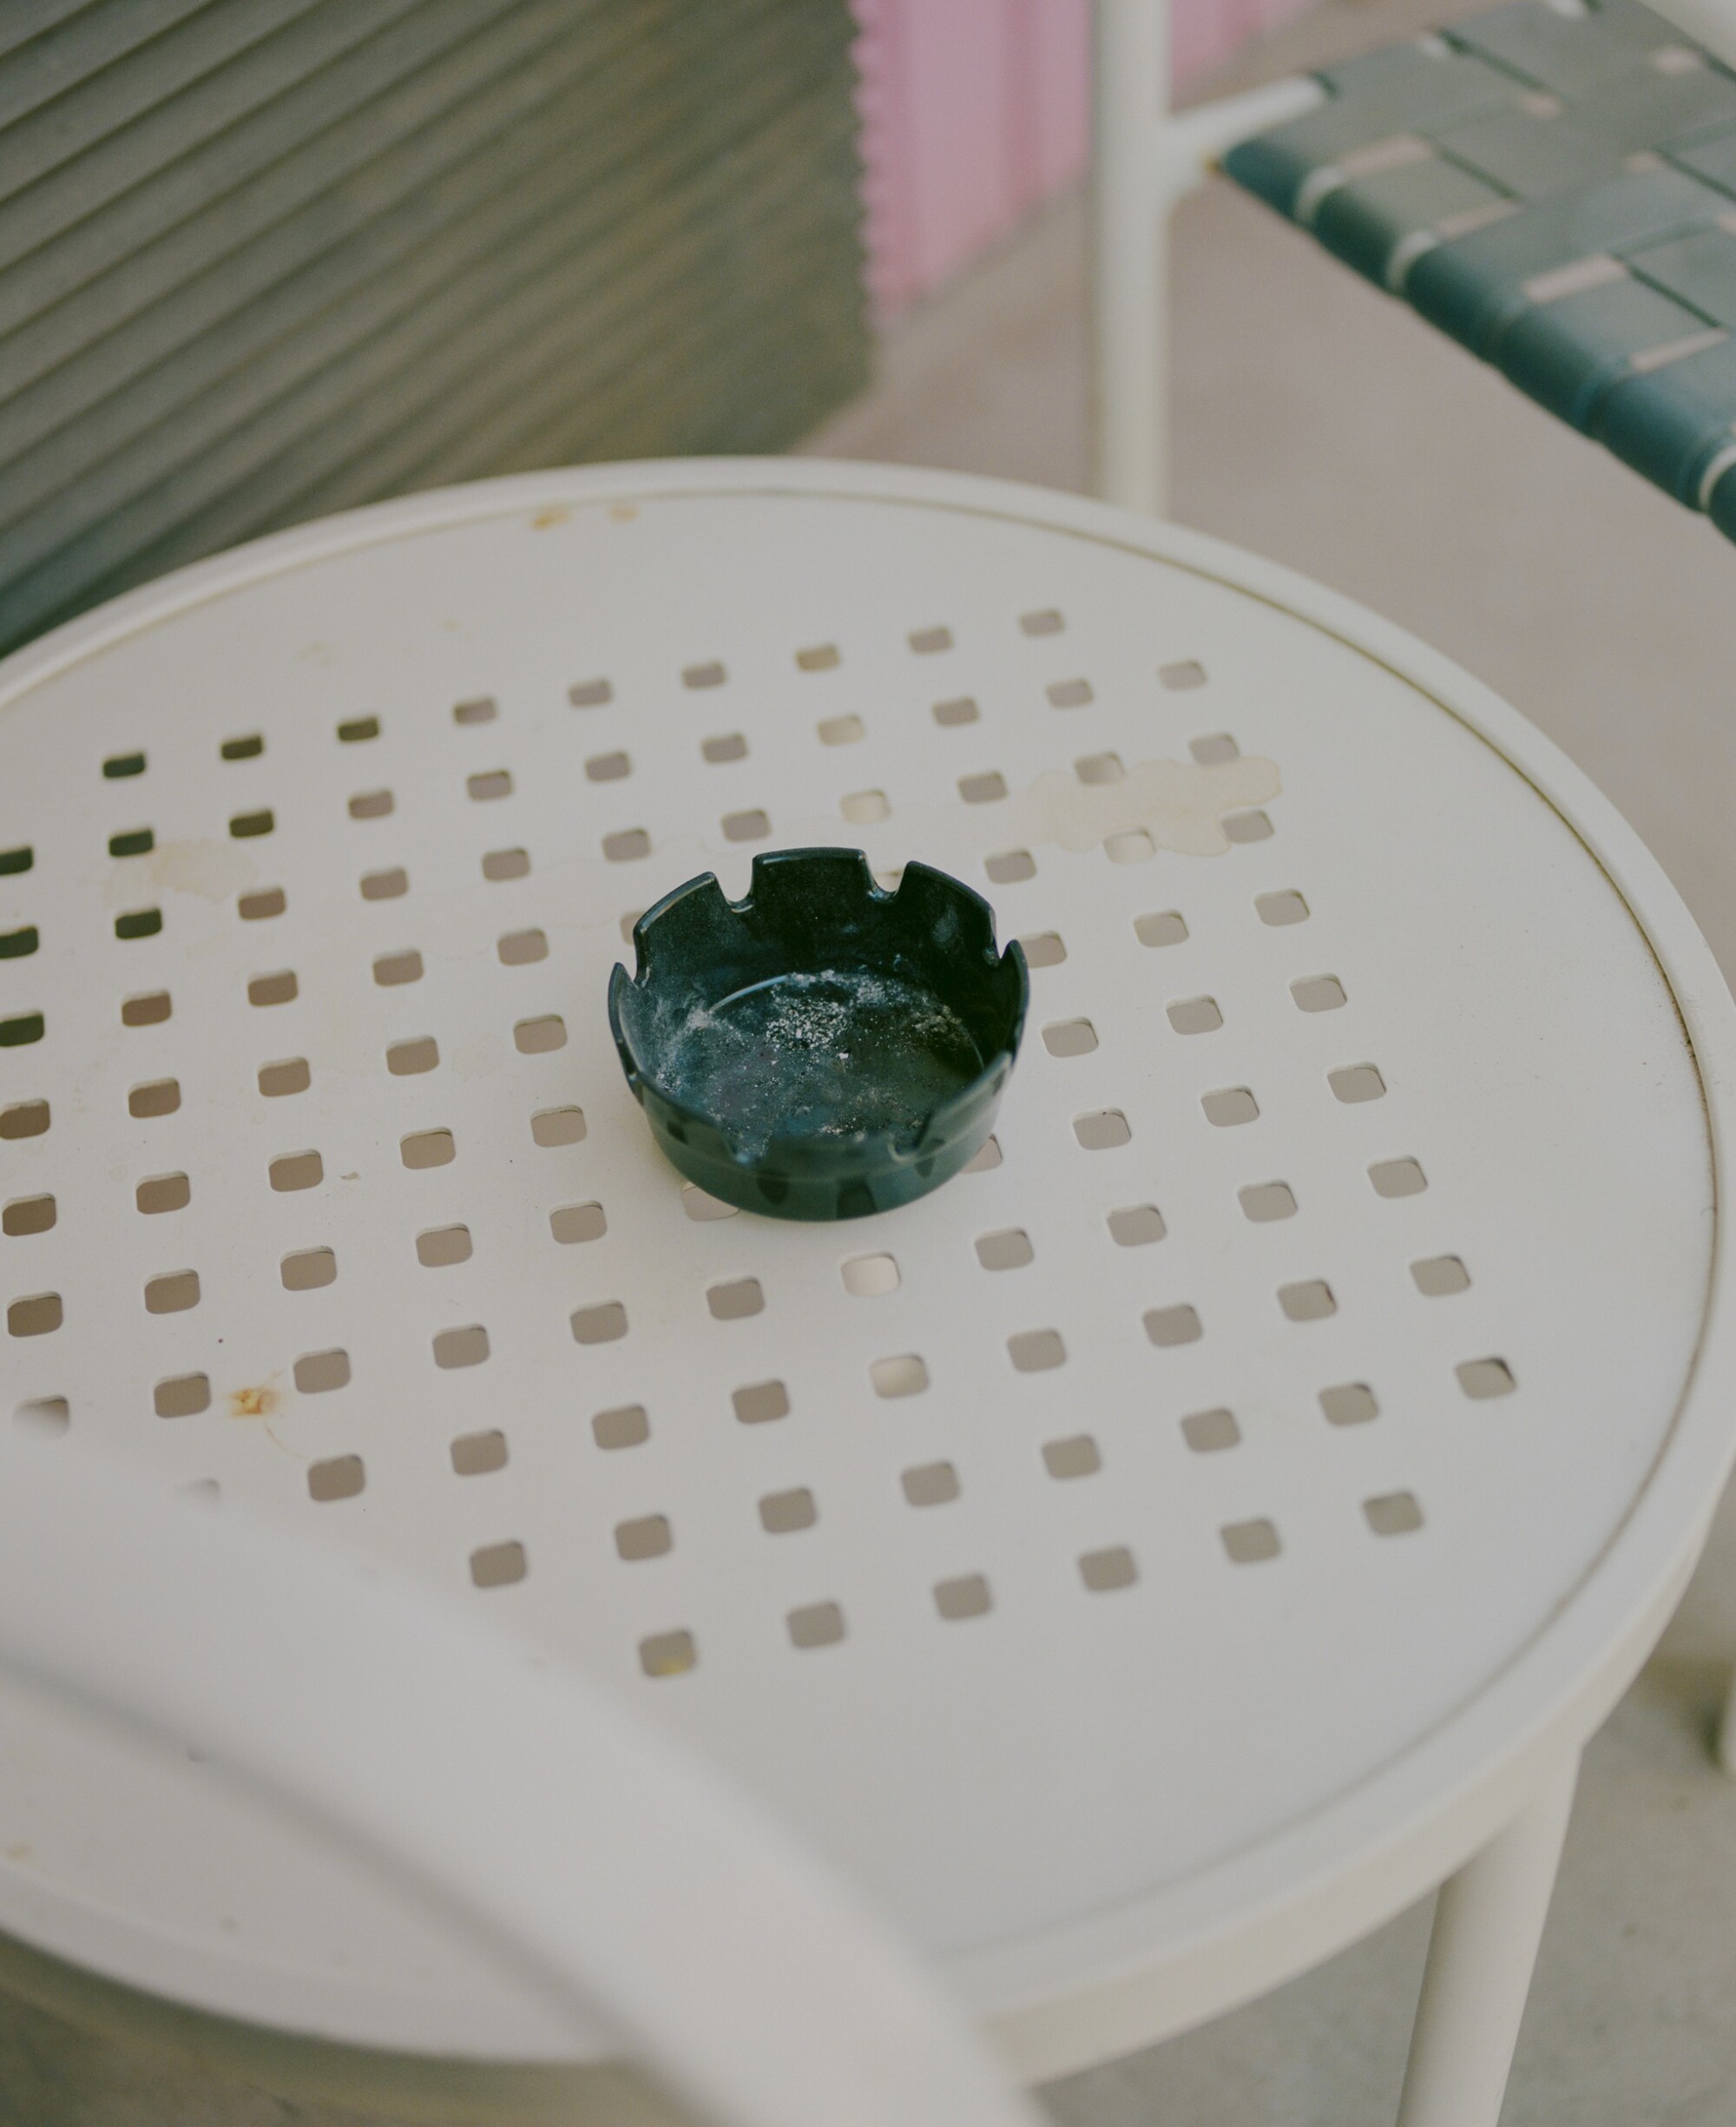 A black ashtray rests on a white table with a perforated top.